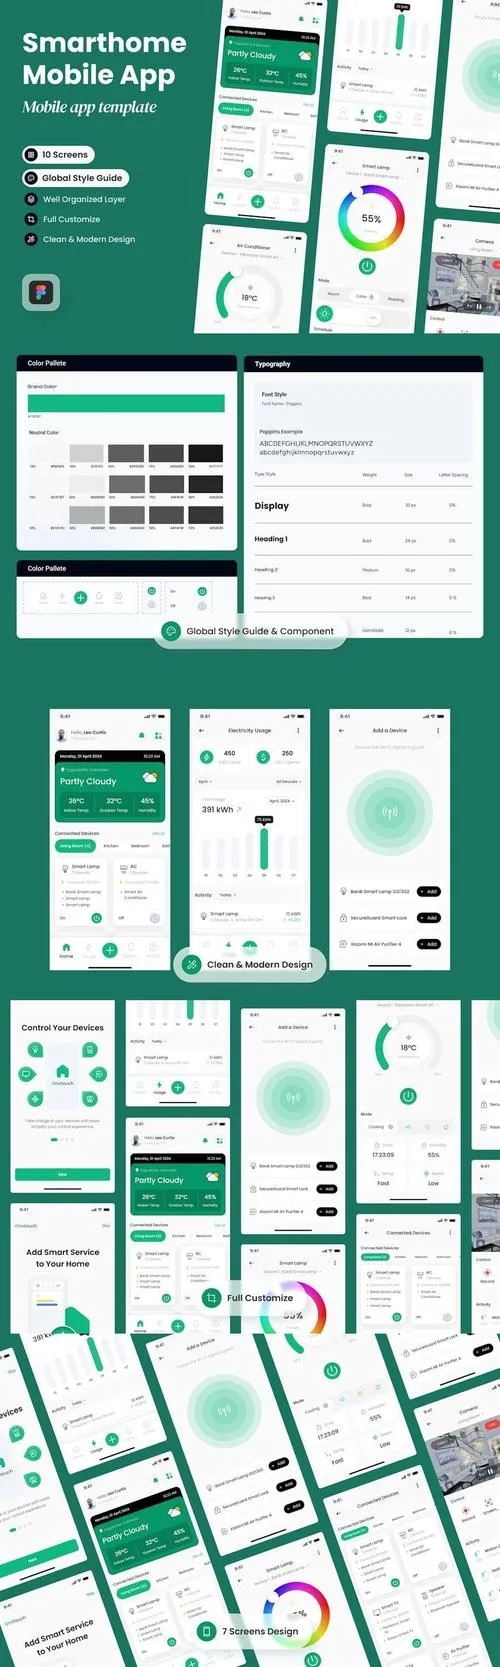 Onetouch - Smarthome Mobile Apps